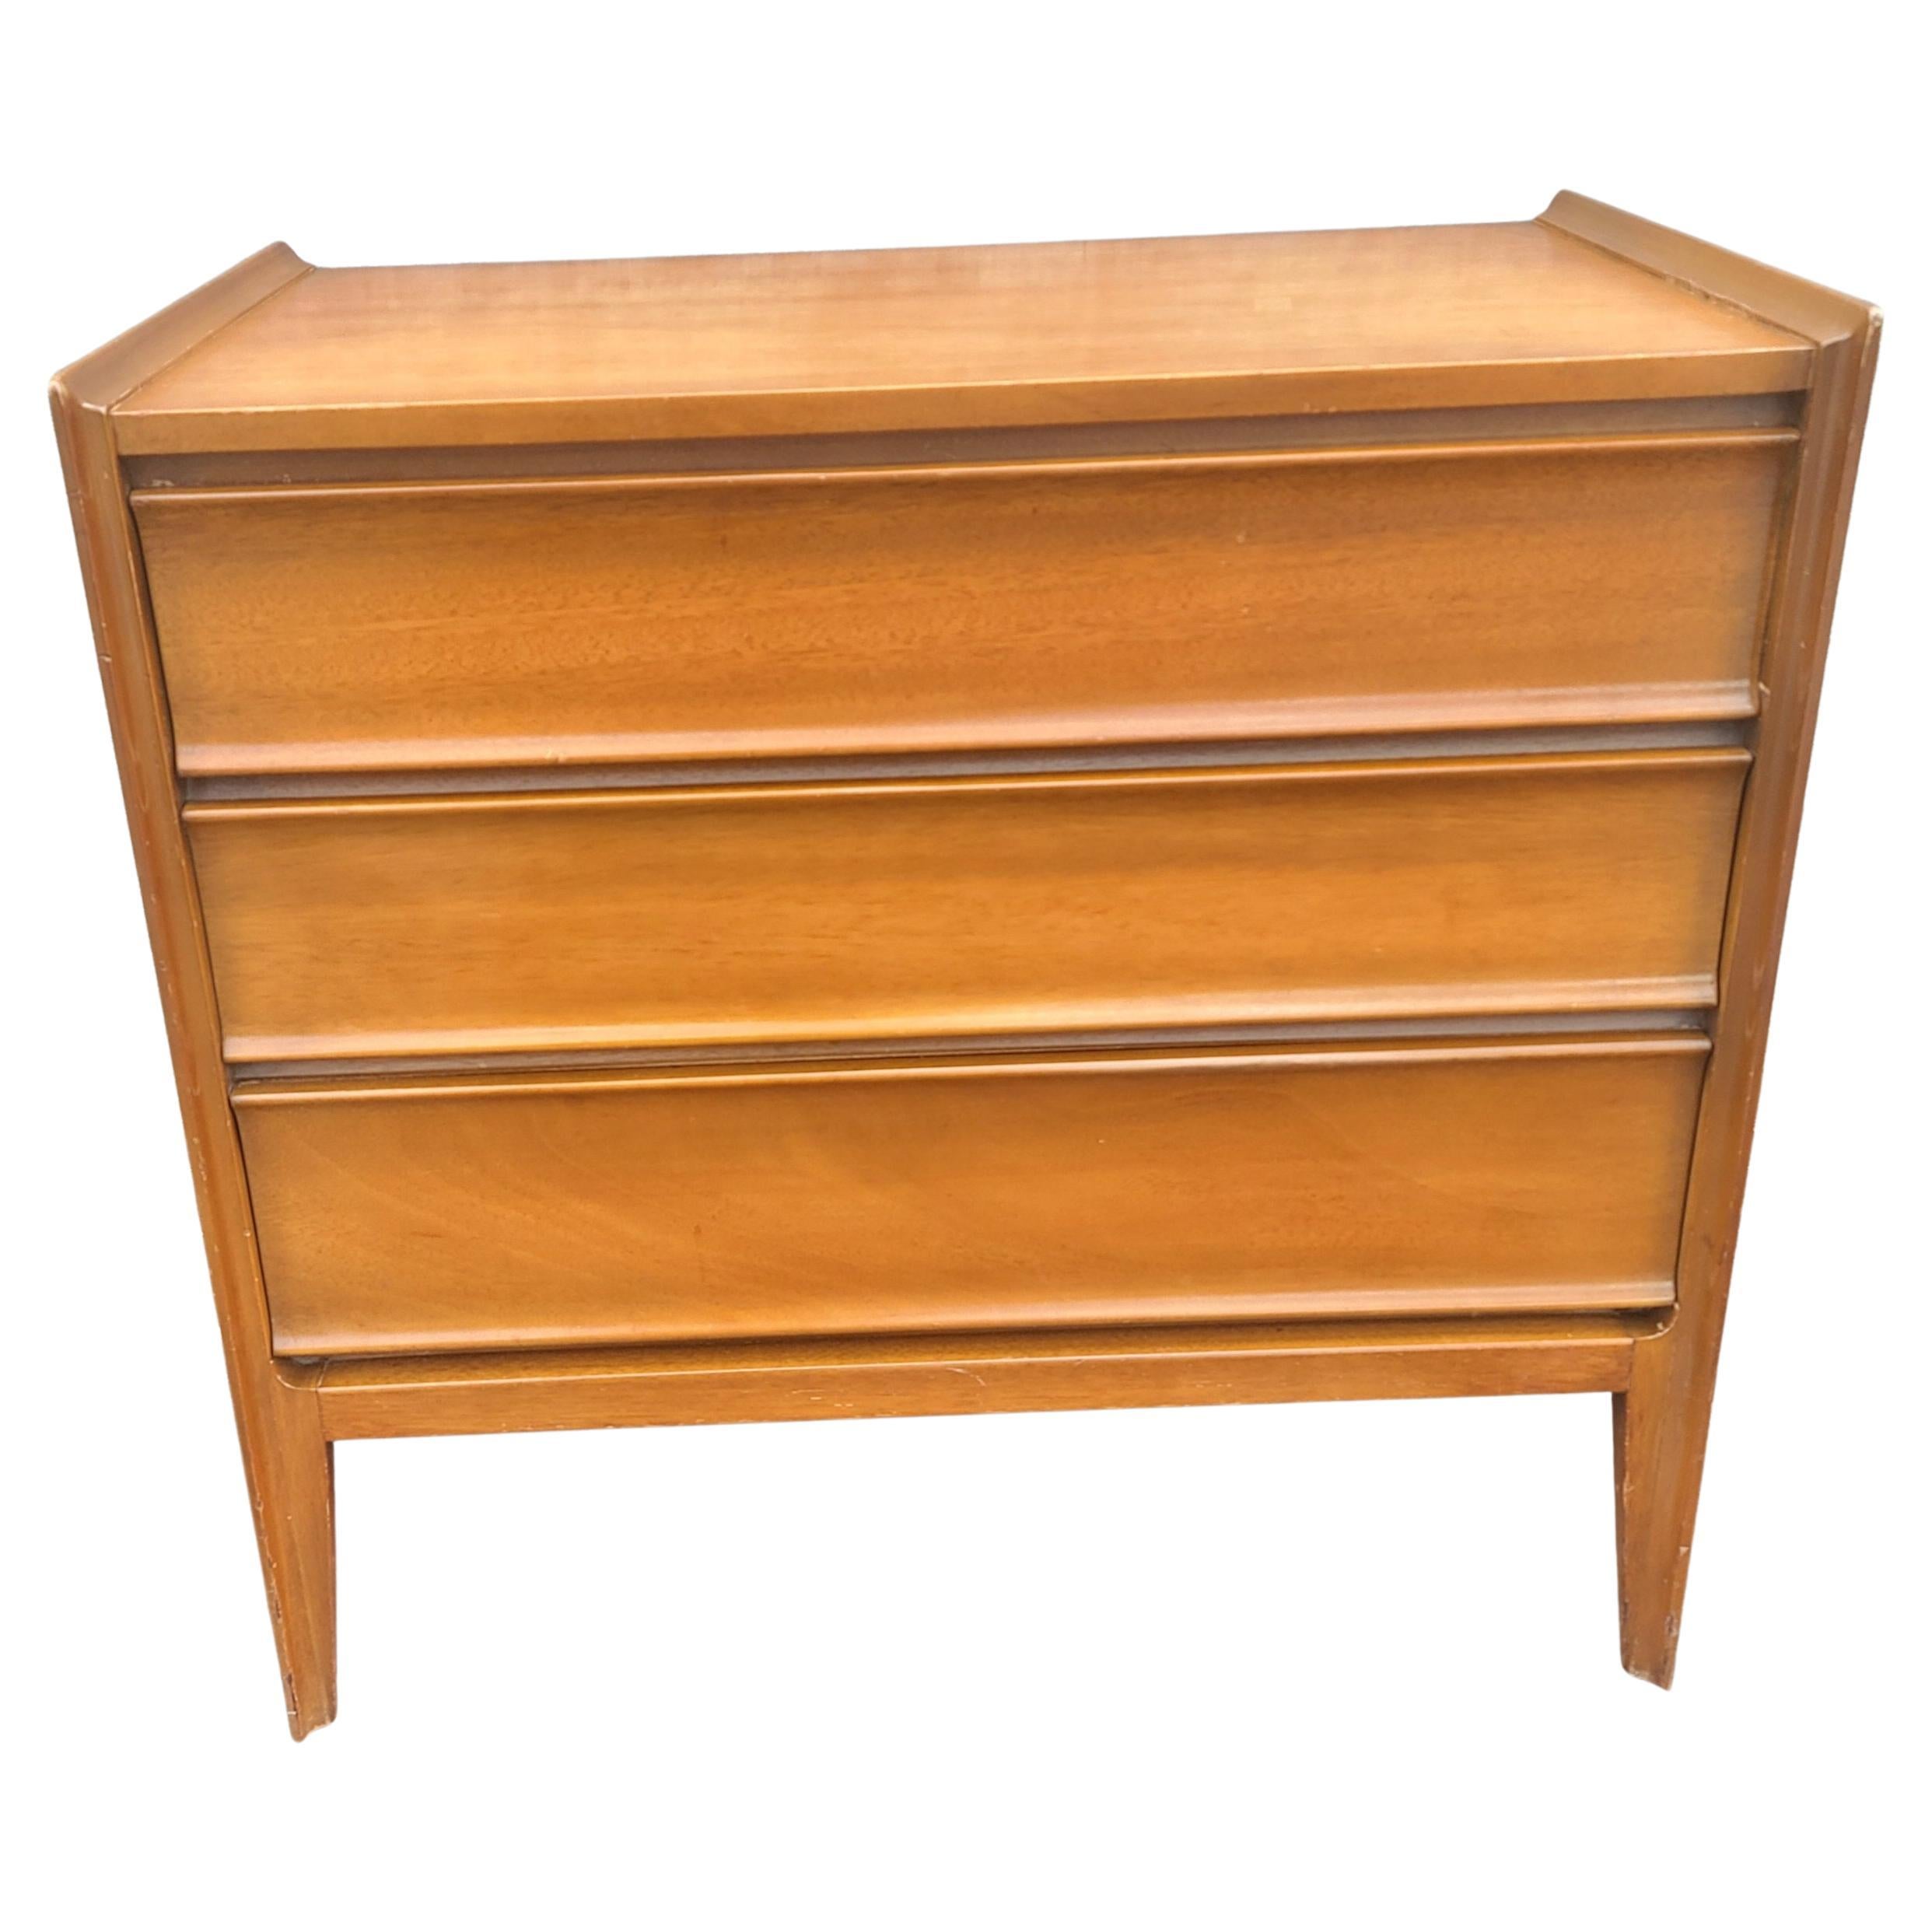 A 1950s Mid-Century Danish Modern Teak United Furniture Chest of drawers with dovatail joints and sleek integrated drawer handles measuring 32